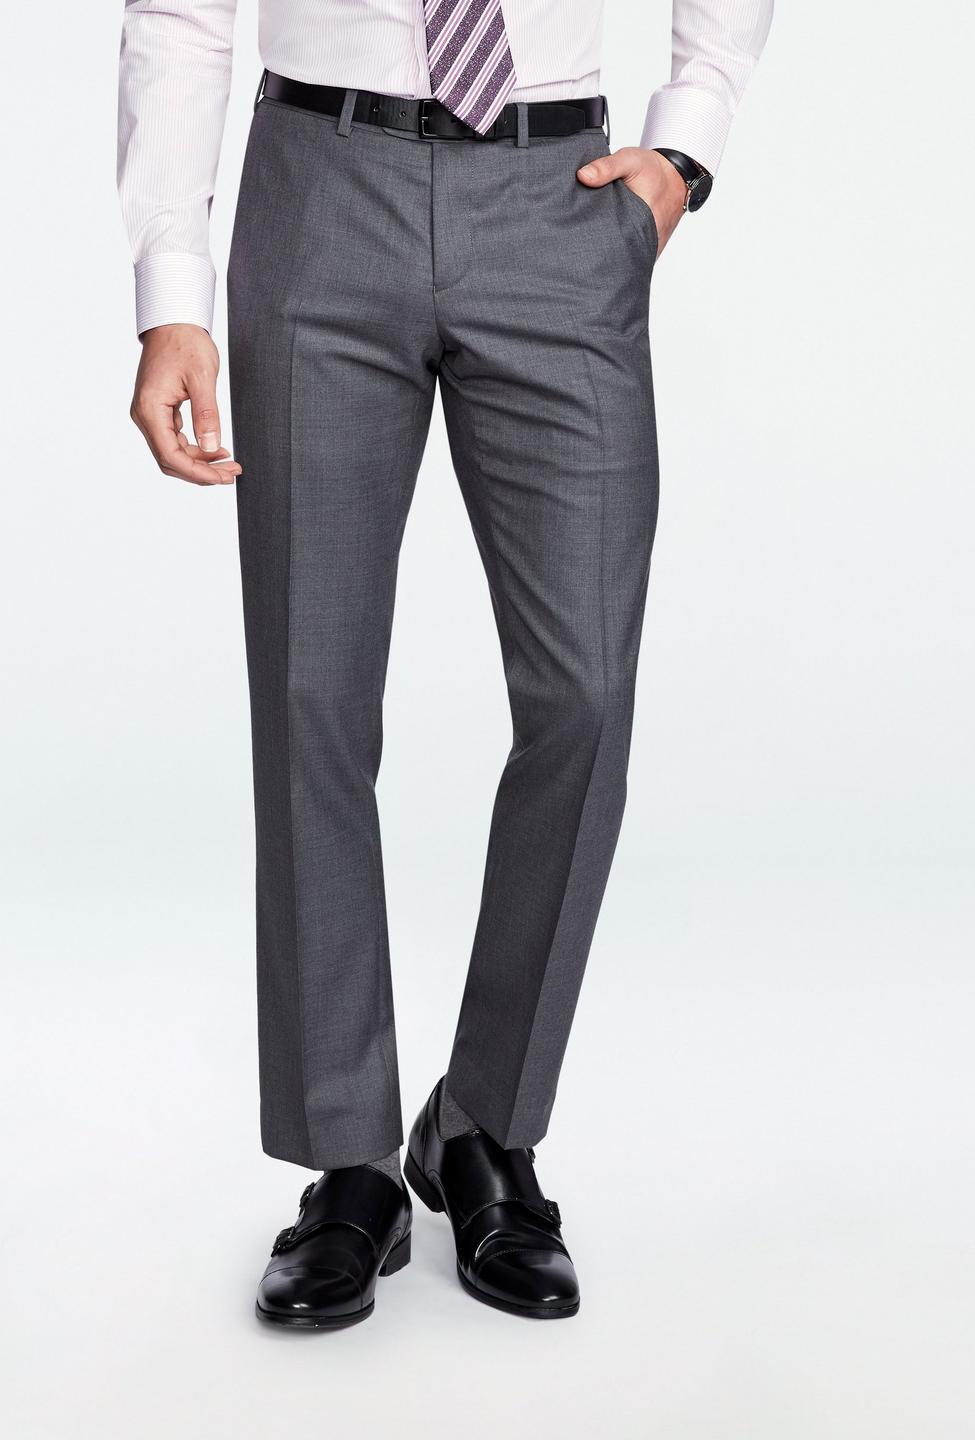 Gray pants - Solid Design from Luxury Indochino Collection